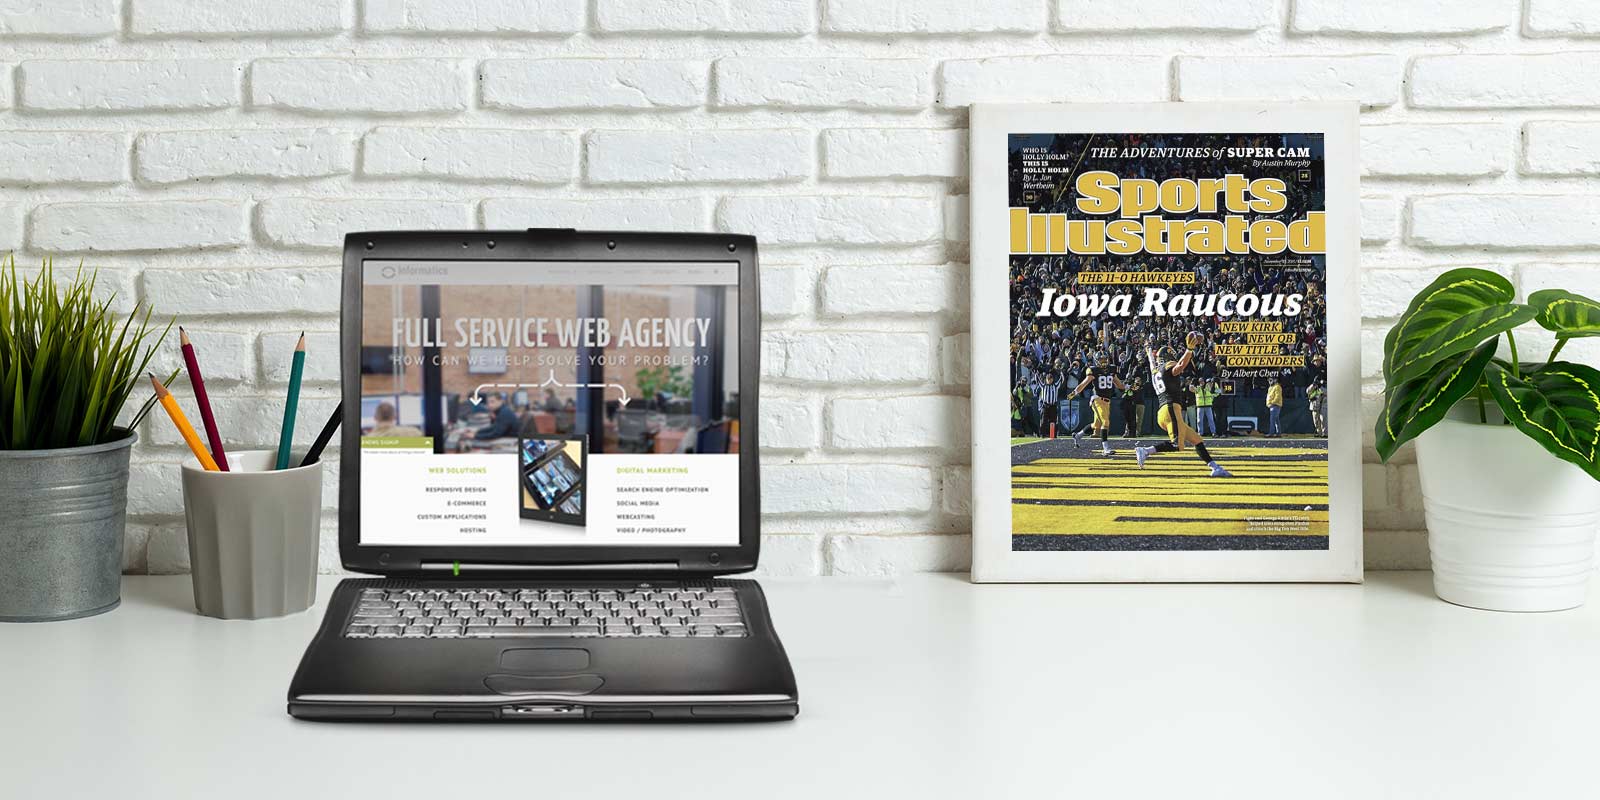 An old computer shows the Informatics website as it appeared in 2015 on a desk, while a poster for the Iowa Hakweyes football team appears in the background